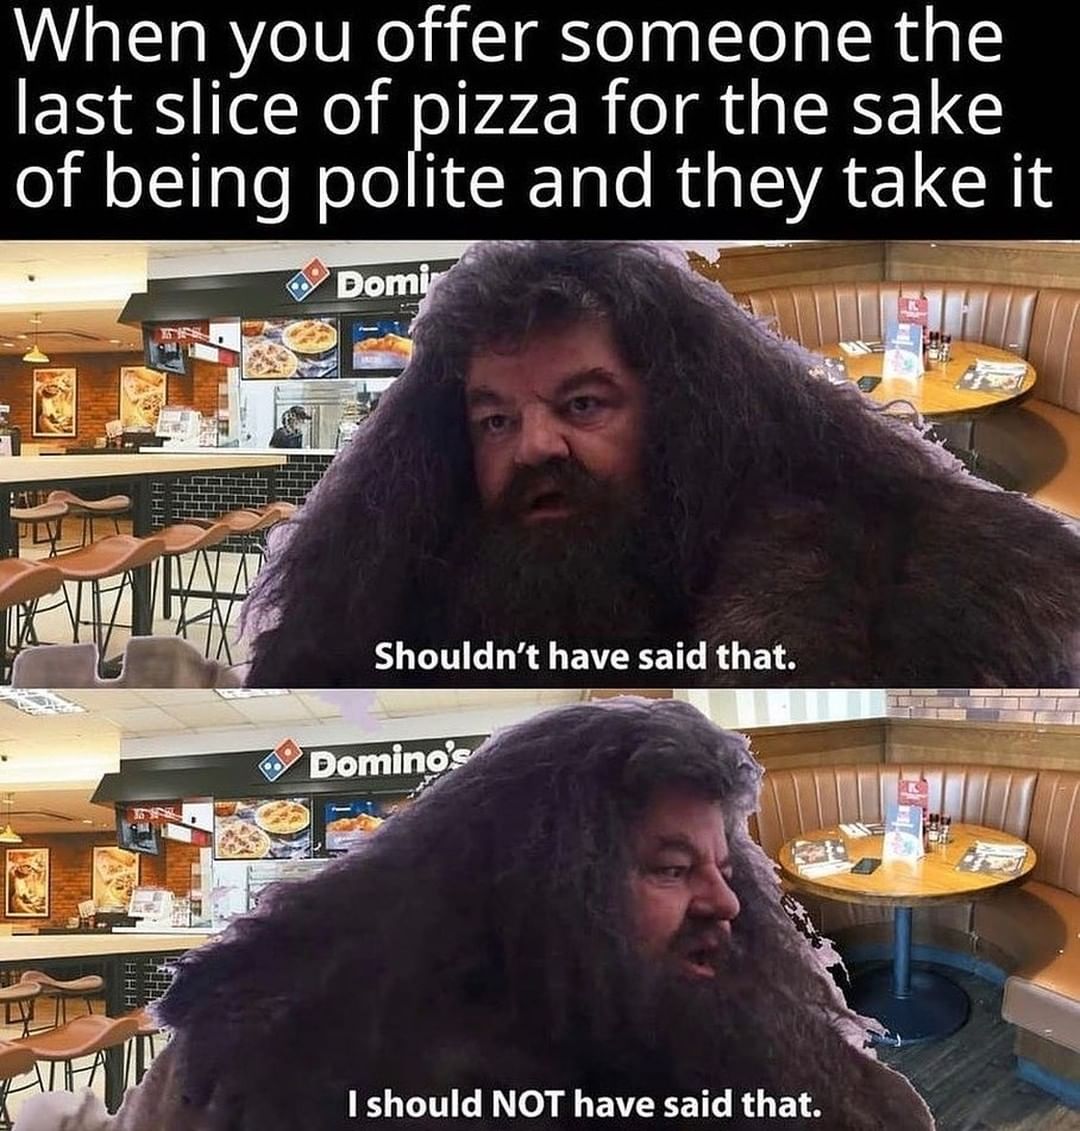 When you offer someone the last slice of pizza for the sake of being polite and they take it.  Shouldn't have said that.  I should not have said that.